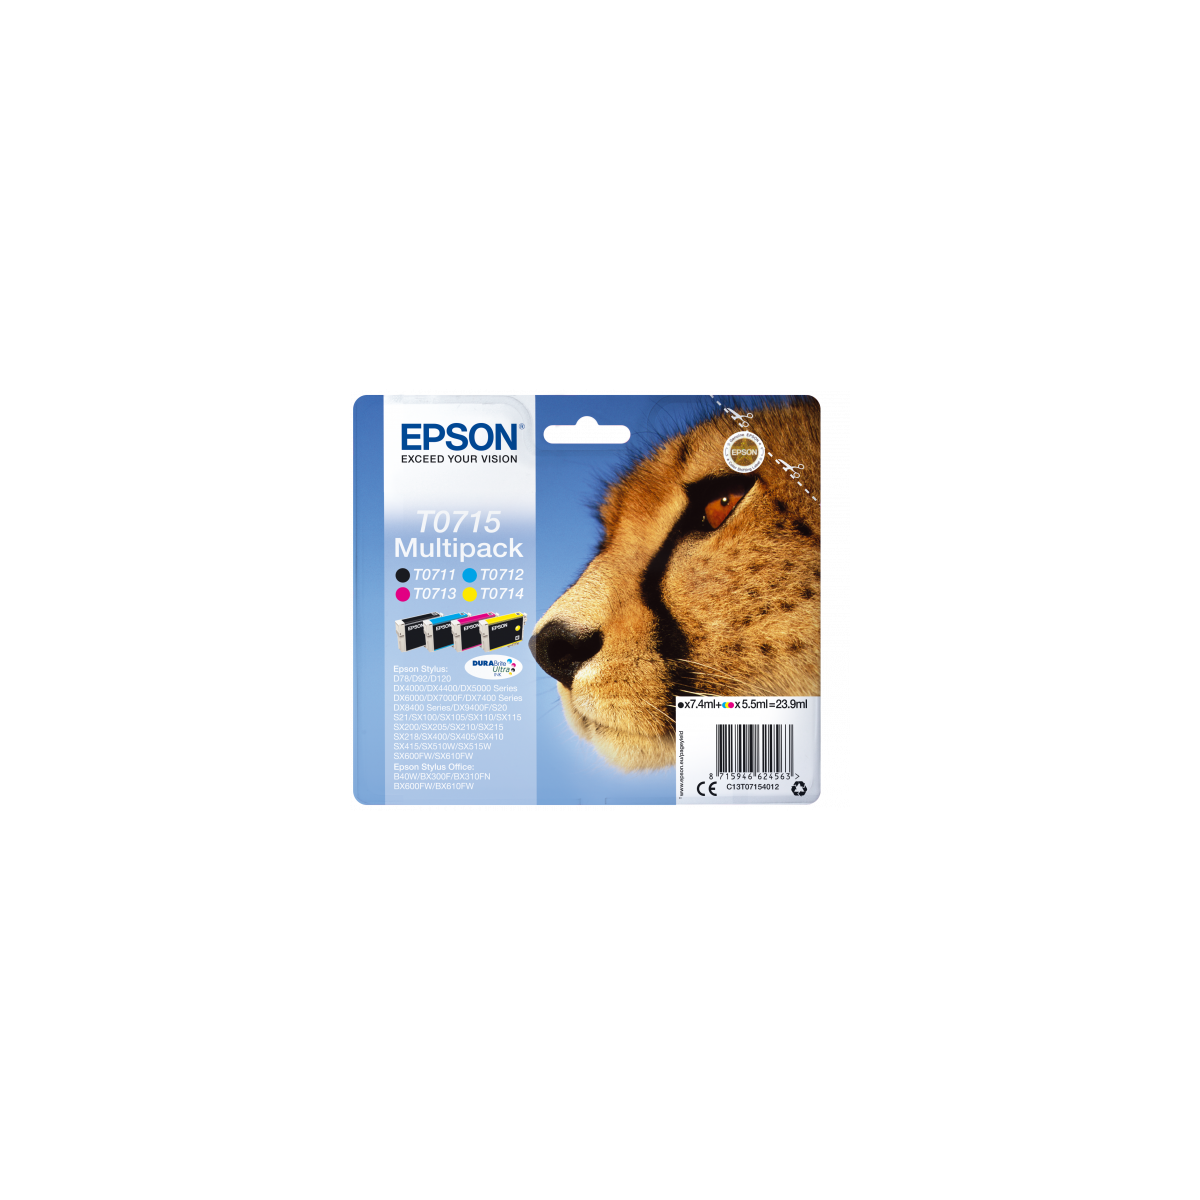 Epson Multipack T0715 4 colores